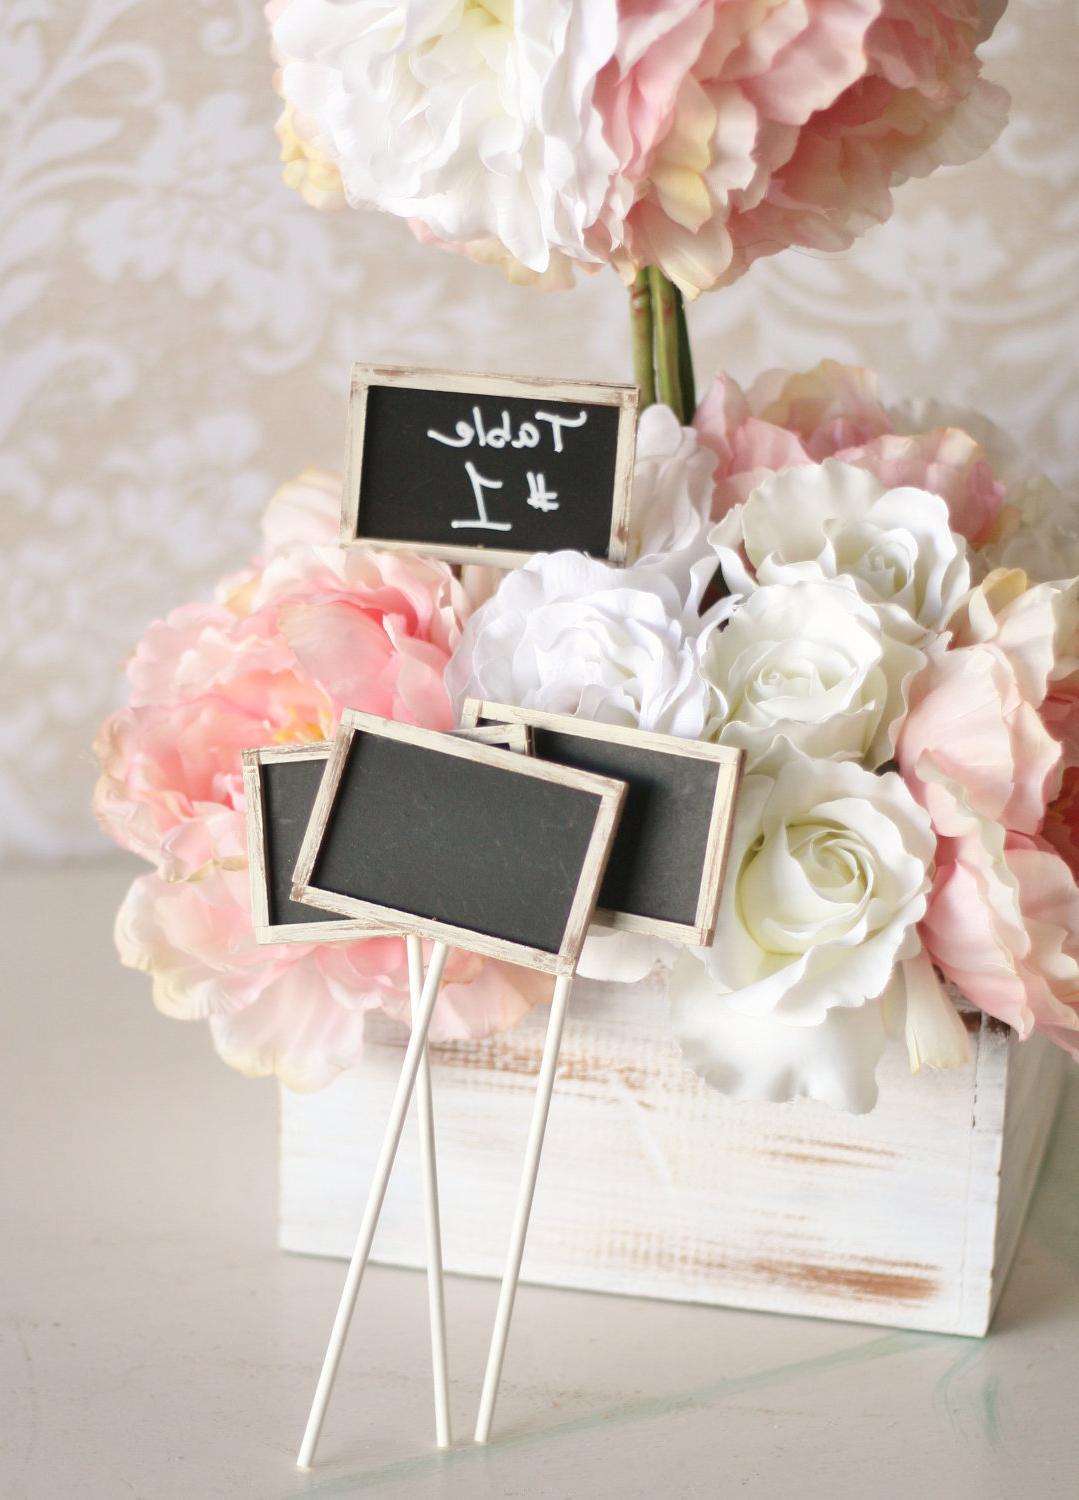 SET of 12 Rustic Chic Chalkboards On Sticks Table Numbers Buffet Reception